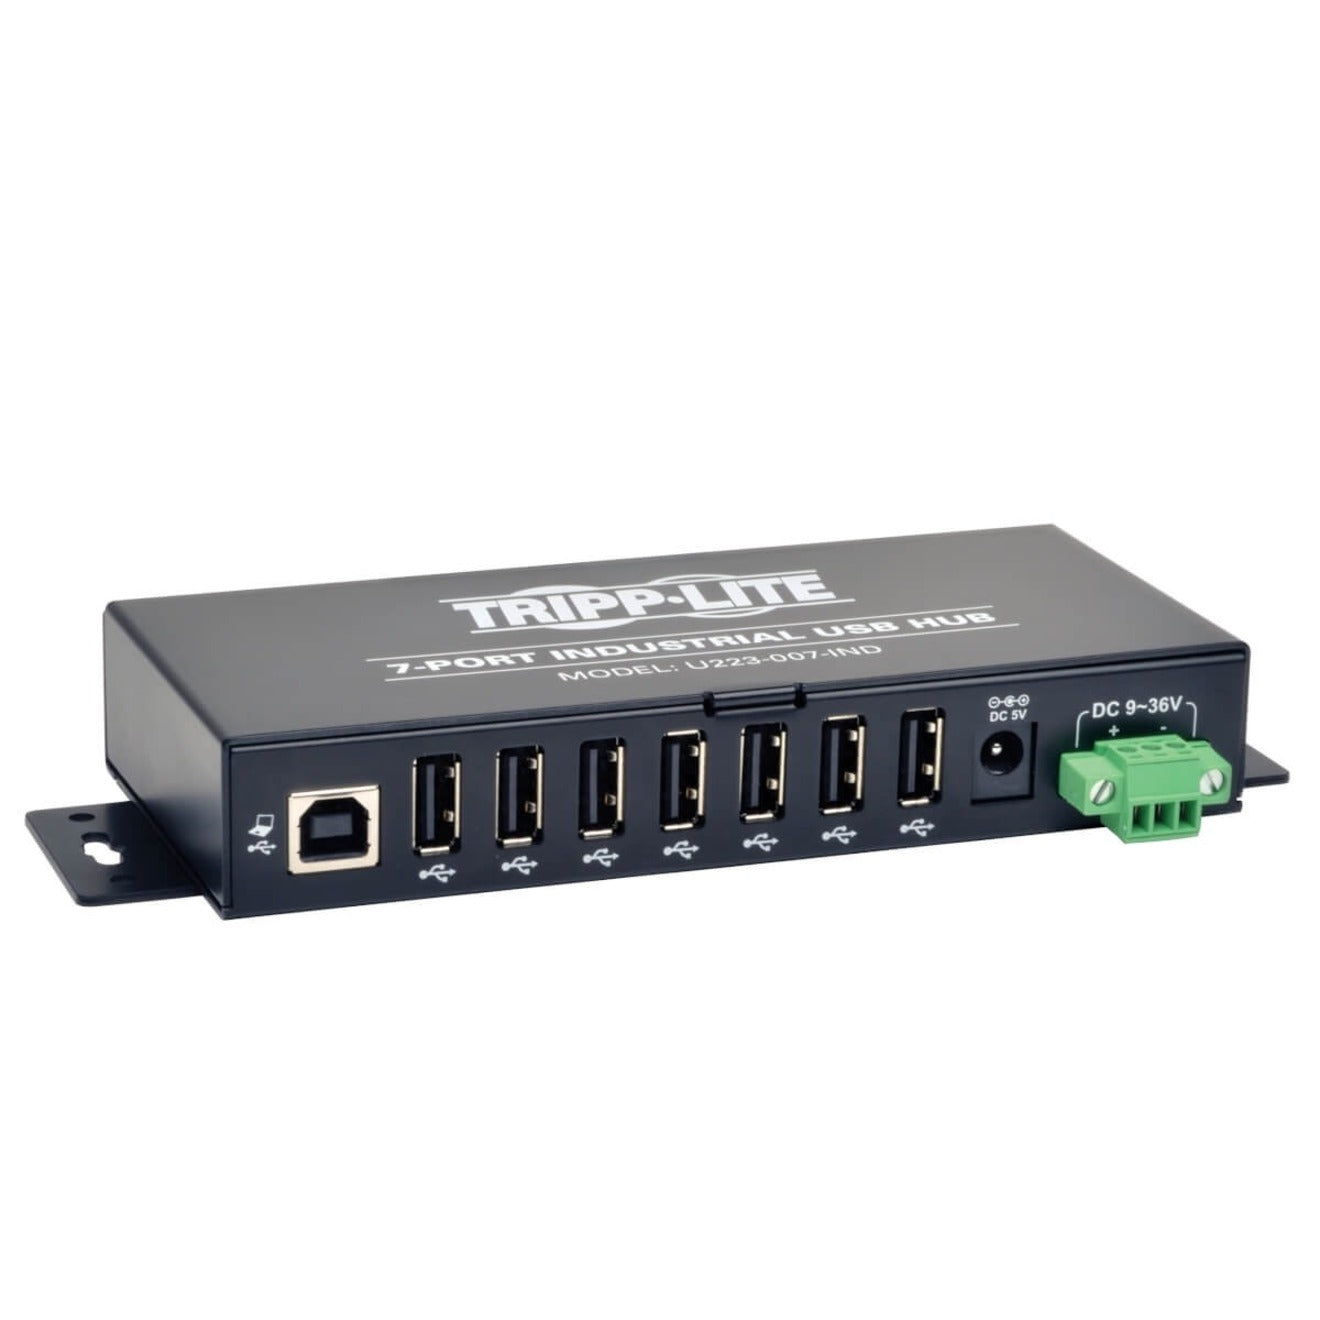 Tripp Lite U223-007-IND 7-Port Industrial USB 2.0 Hub with 15kV ESD Immunity, High-Speed Data Transfer and ESD Protection